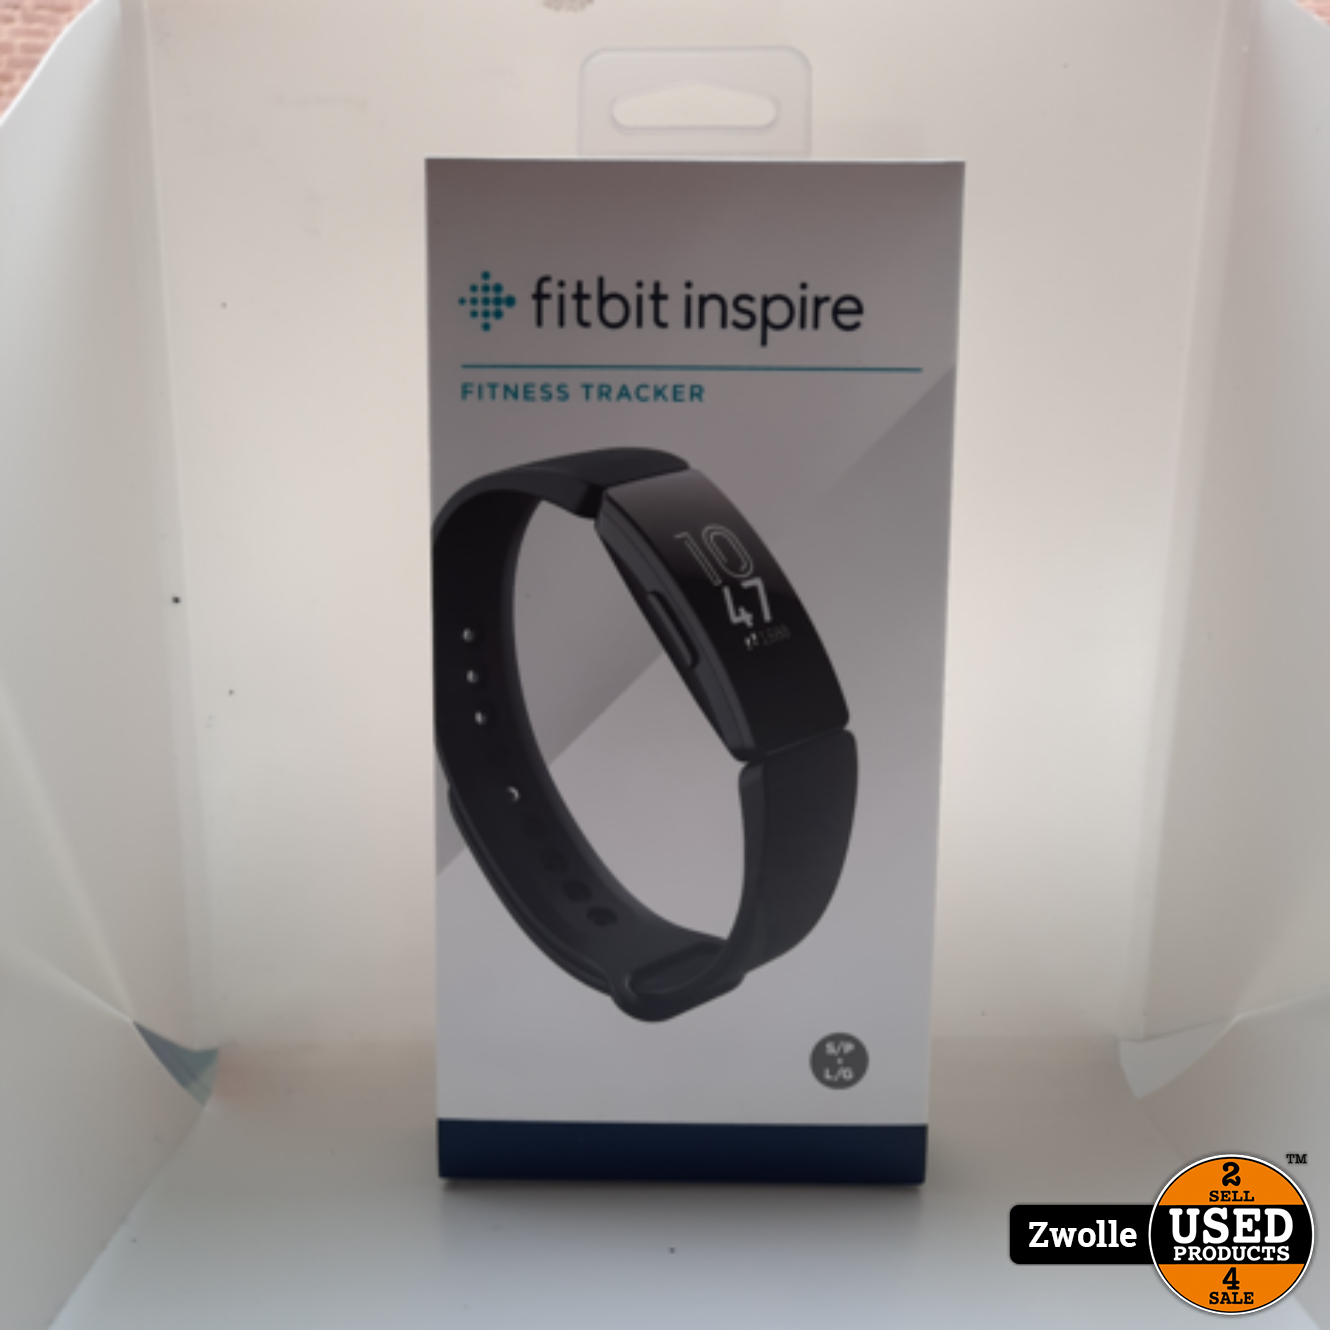 FITBIT 2 | nieuw in verpakking - Used Products Zwolle